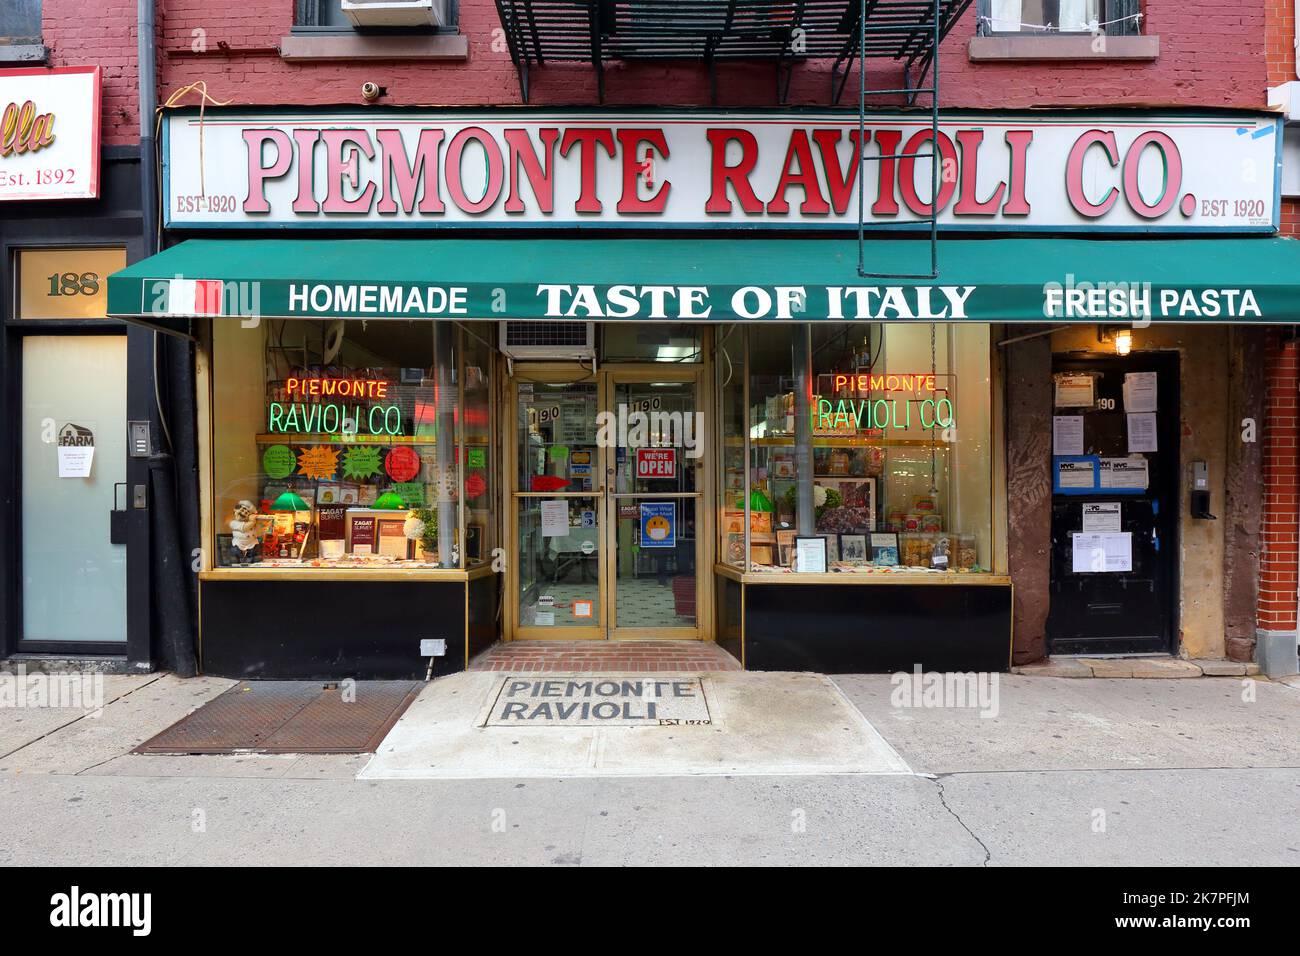 Piedmonte Ravioli, 190 Grand St, New York, NYC storefront photo of a pasta store in the Little Italy neighborhood in Manhattan. Stock Photo